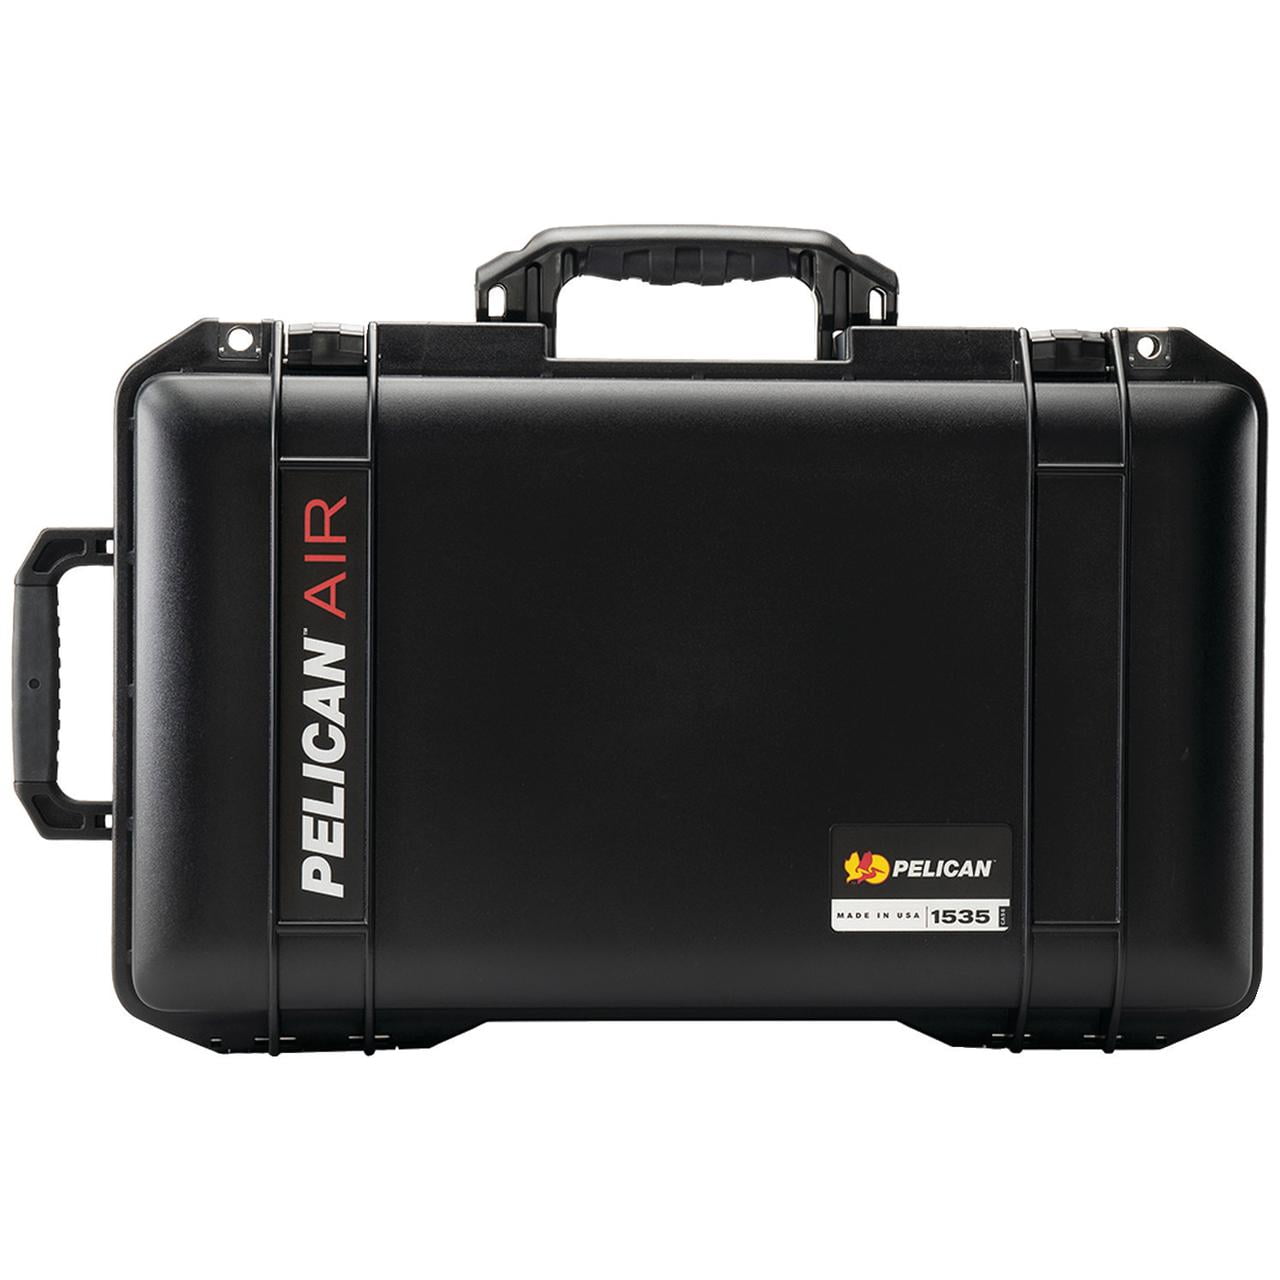 Pelican 015350 0011 110 1535 Air Wheeled Case with Top Handle bd7260d0 7d41 4d1f b76a 2cf3ed669a60 1.c43a3a3d67fd38bbc1e45114dbf4309c